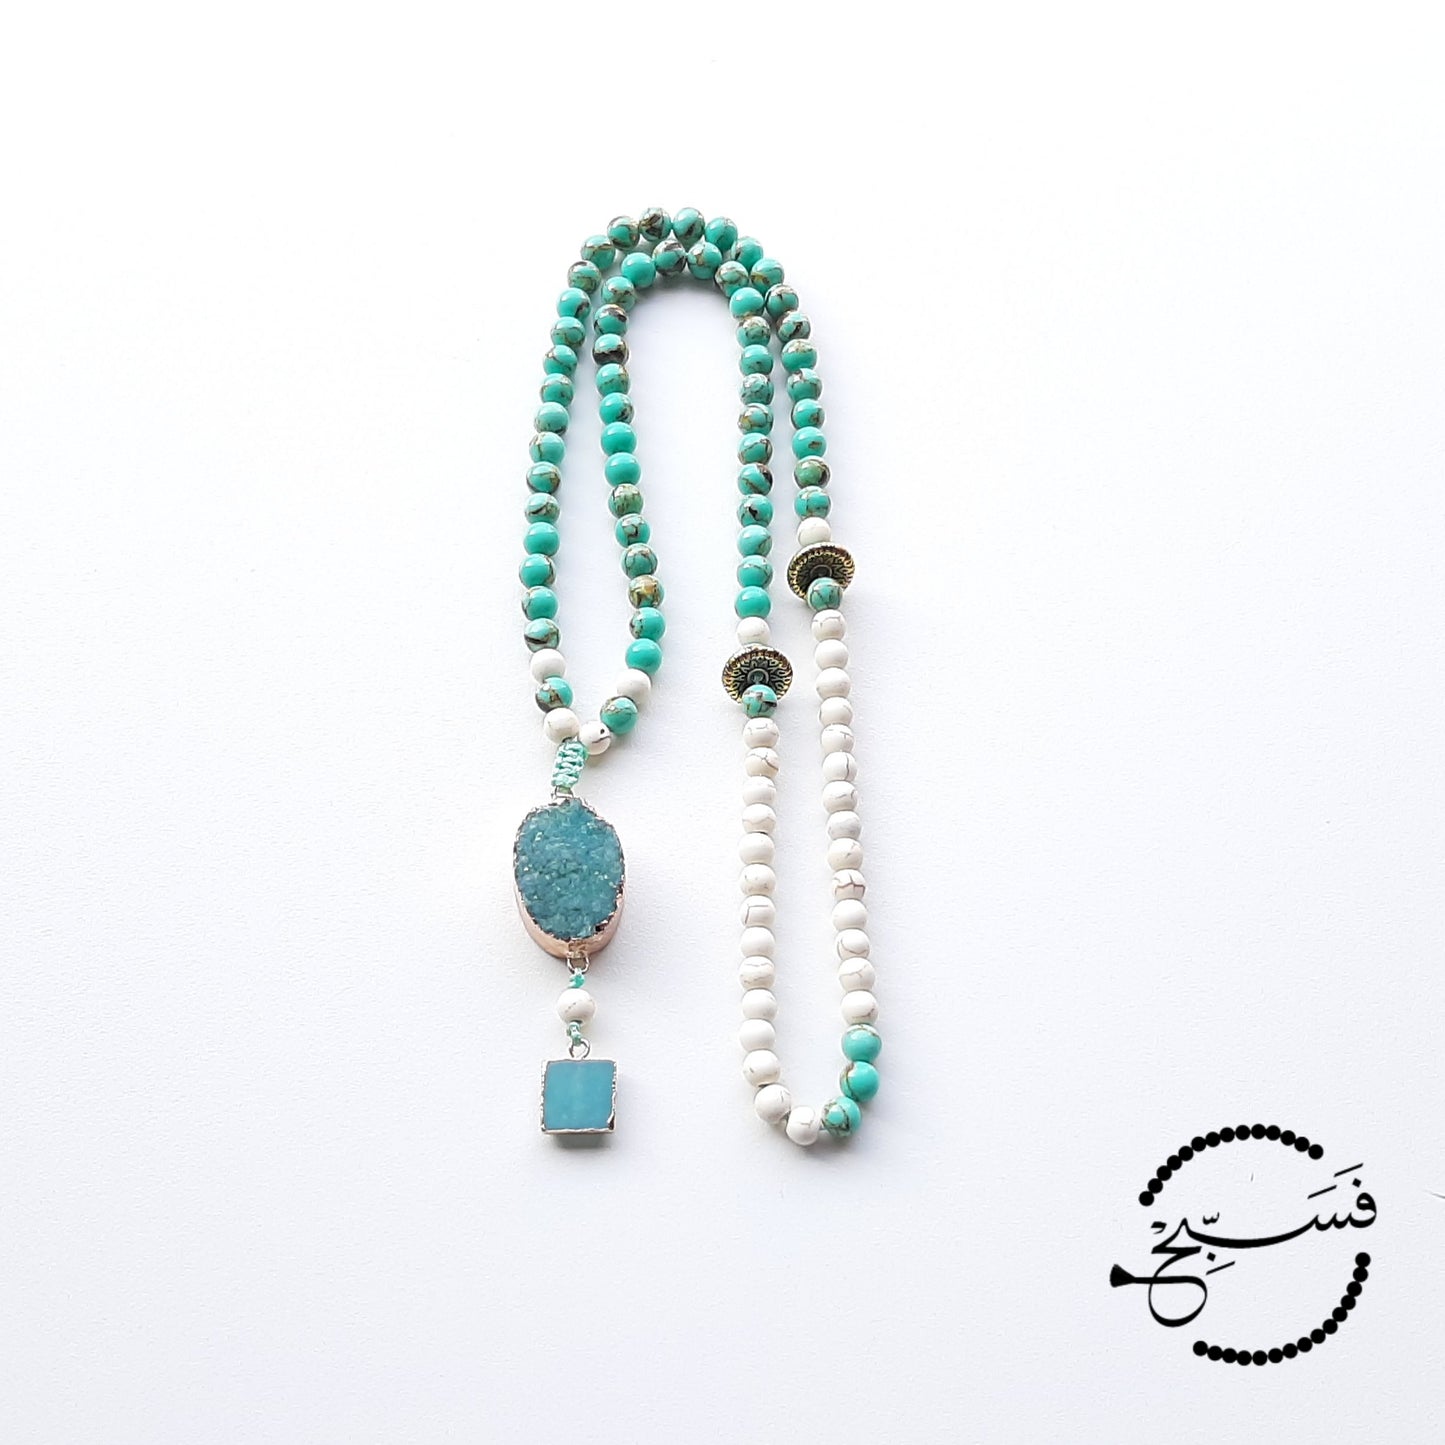 These sea sediment beads are the most gorgeous shade of turquoise! They look especially striking when paired with the beige beads.  We've used a druzy pendant and a mini amazonite pendant to finish off this tasbih.  Packaged in a luxurious pouch and gift box.  99 beads